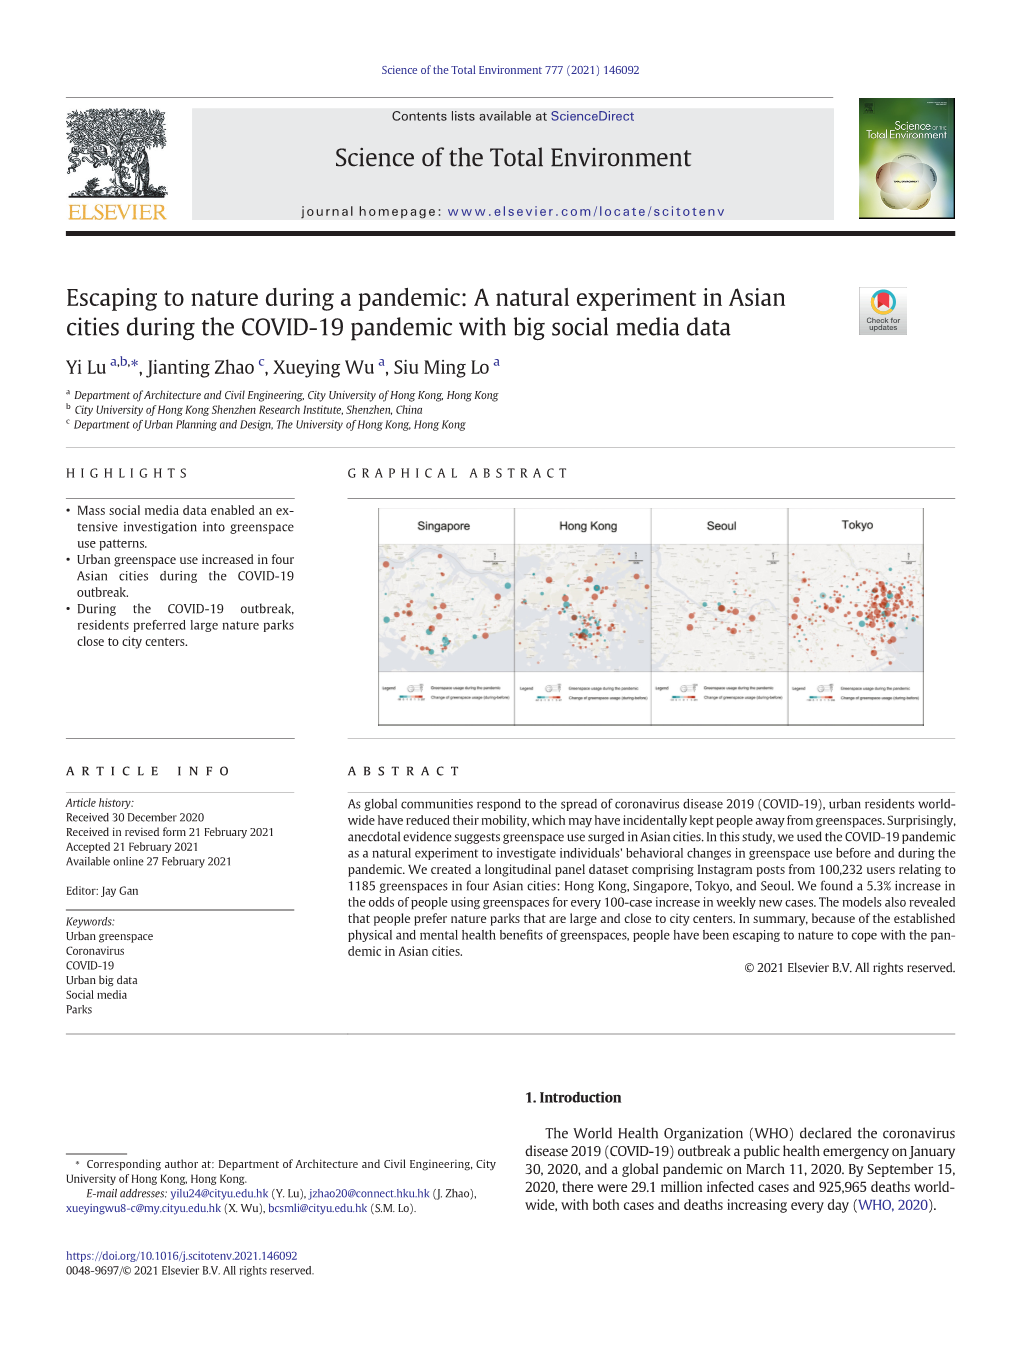 Escaping to Nature During a Pandemic: a Natural Experiment in Asian Cities During the COVID-19 Pandemic with Big Social Media Data